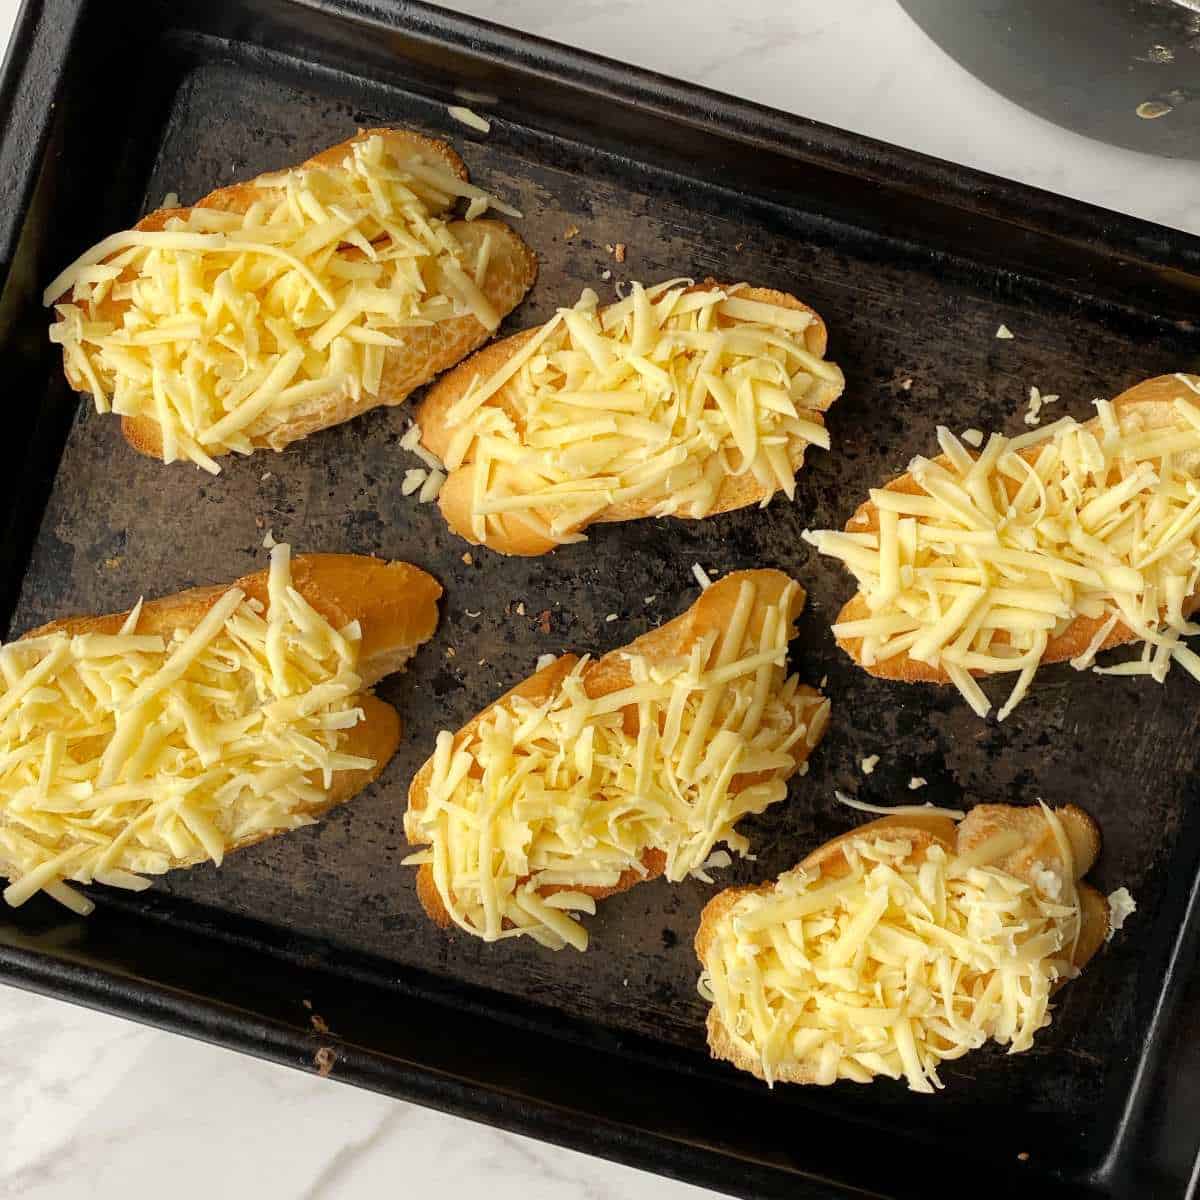 Slice of bread with grated cheese on top on a baking tray.